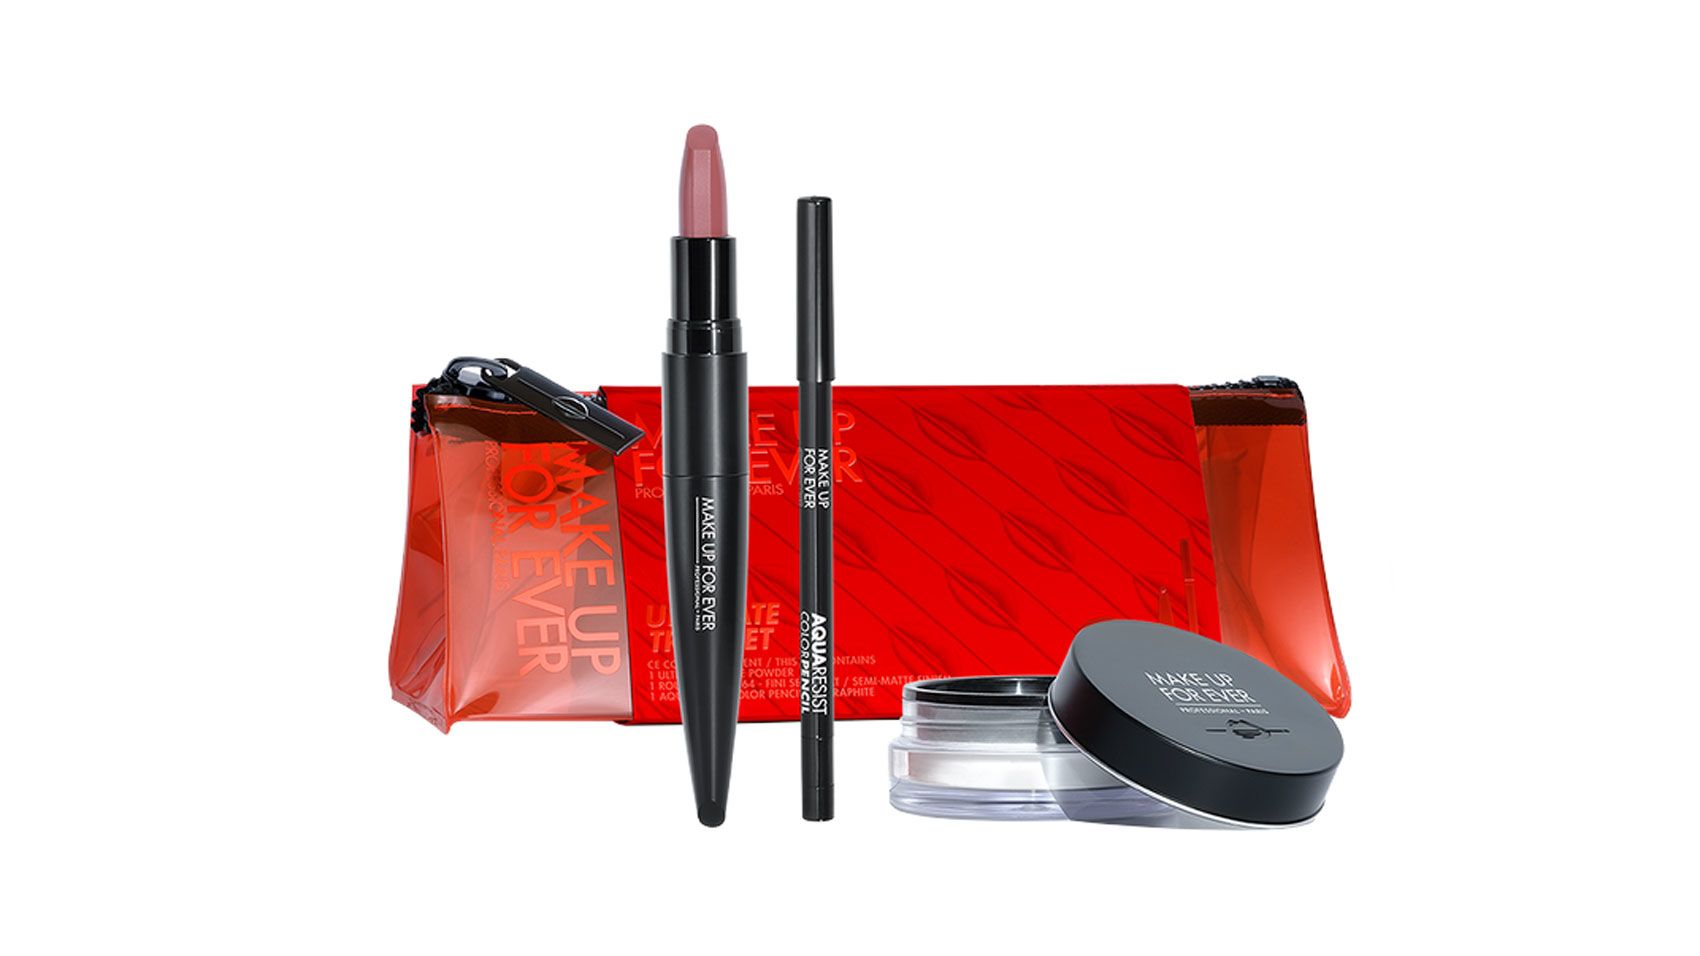 Star Wishing Tree Makeup Gift Box Perfume And Lipstick Case Box Red Color  Tone Matte Velvet Finish Lipstick With Perfume, Check Out Today's Deals  Now